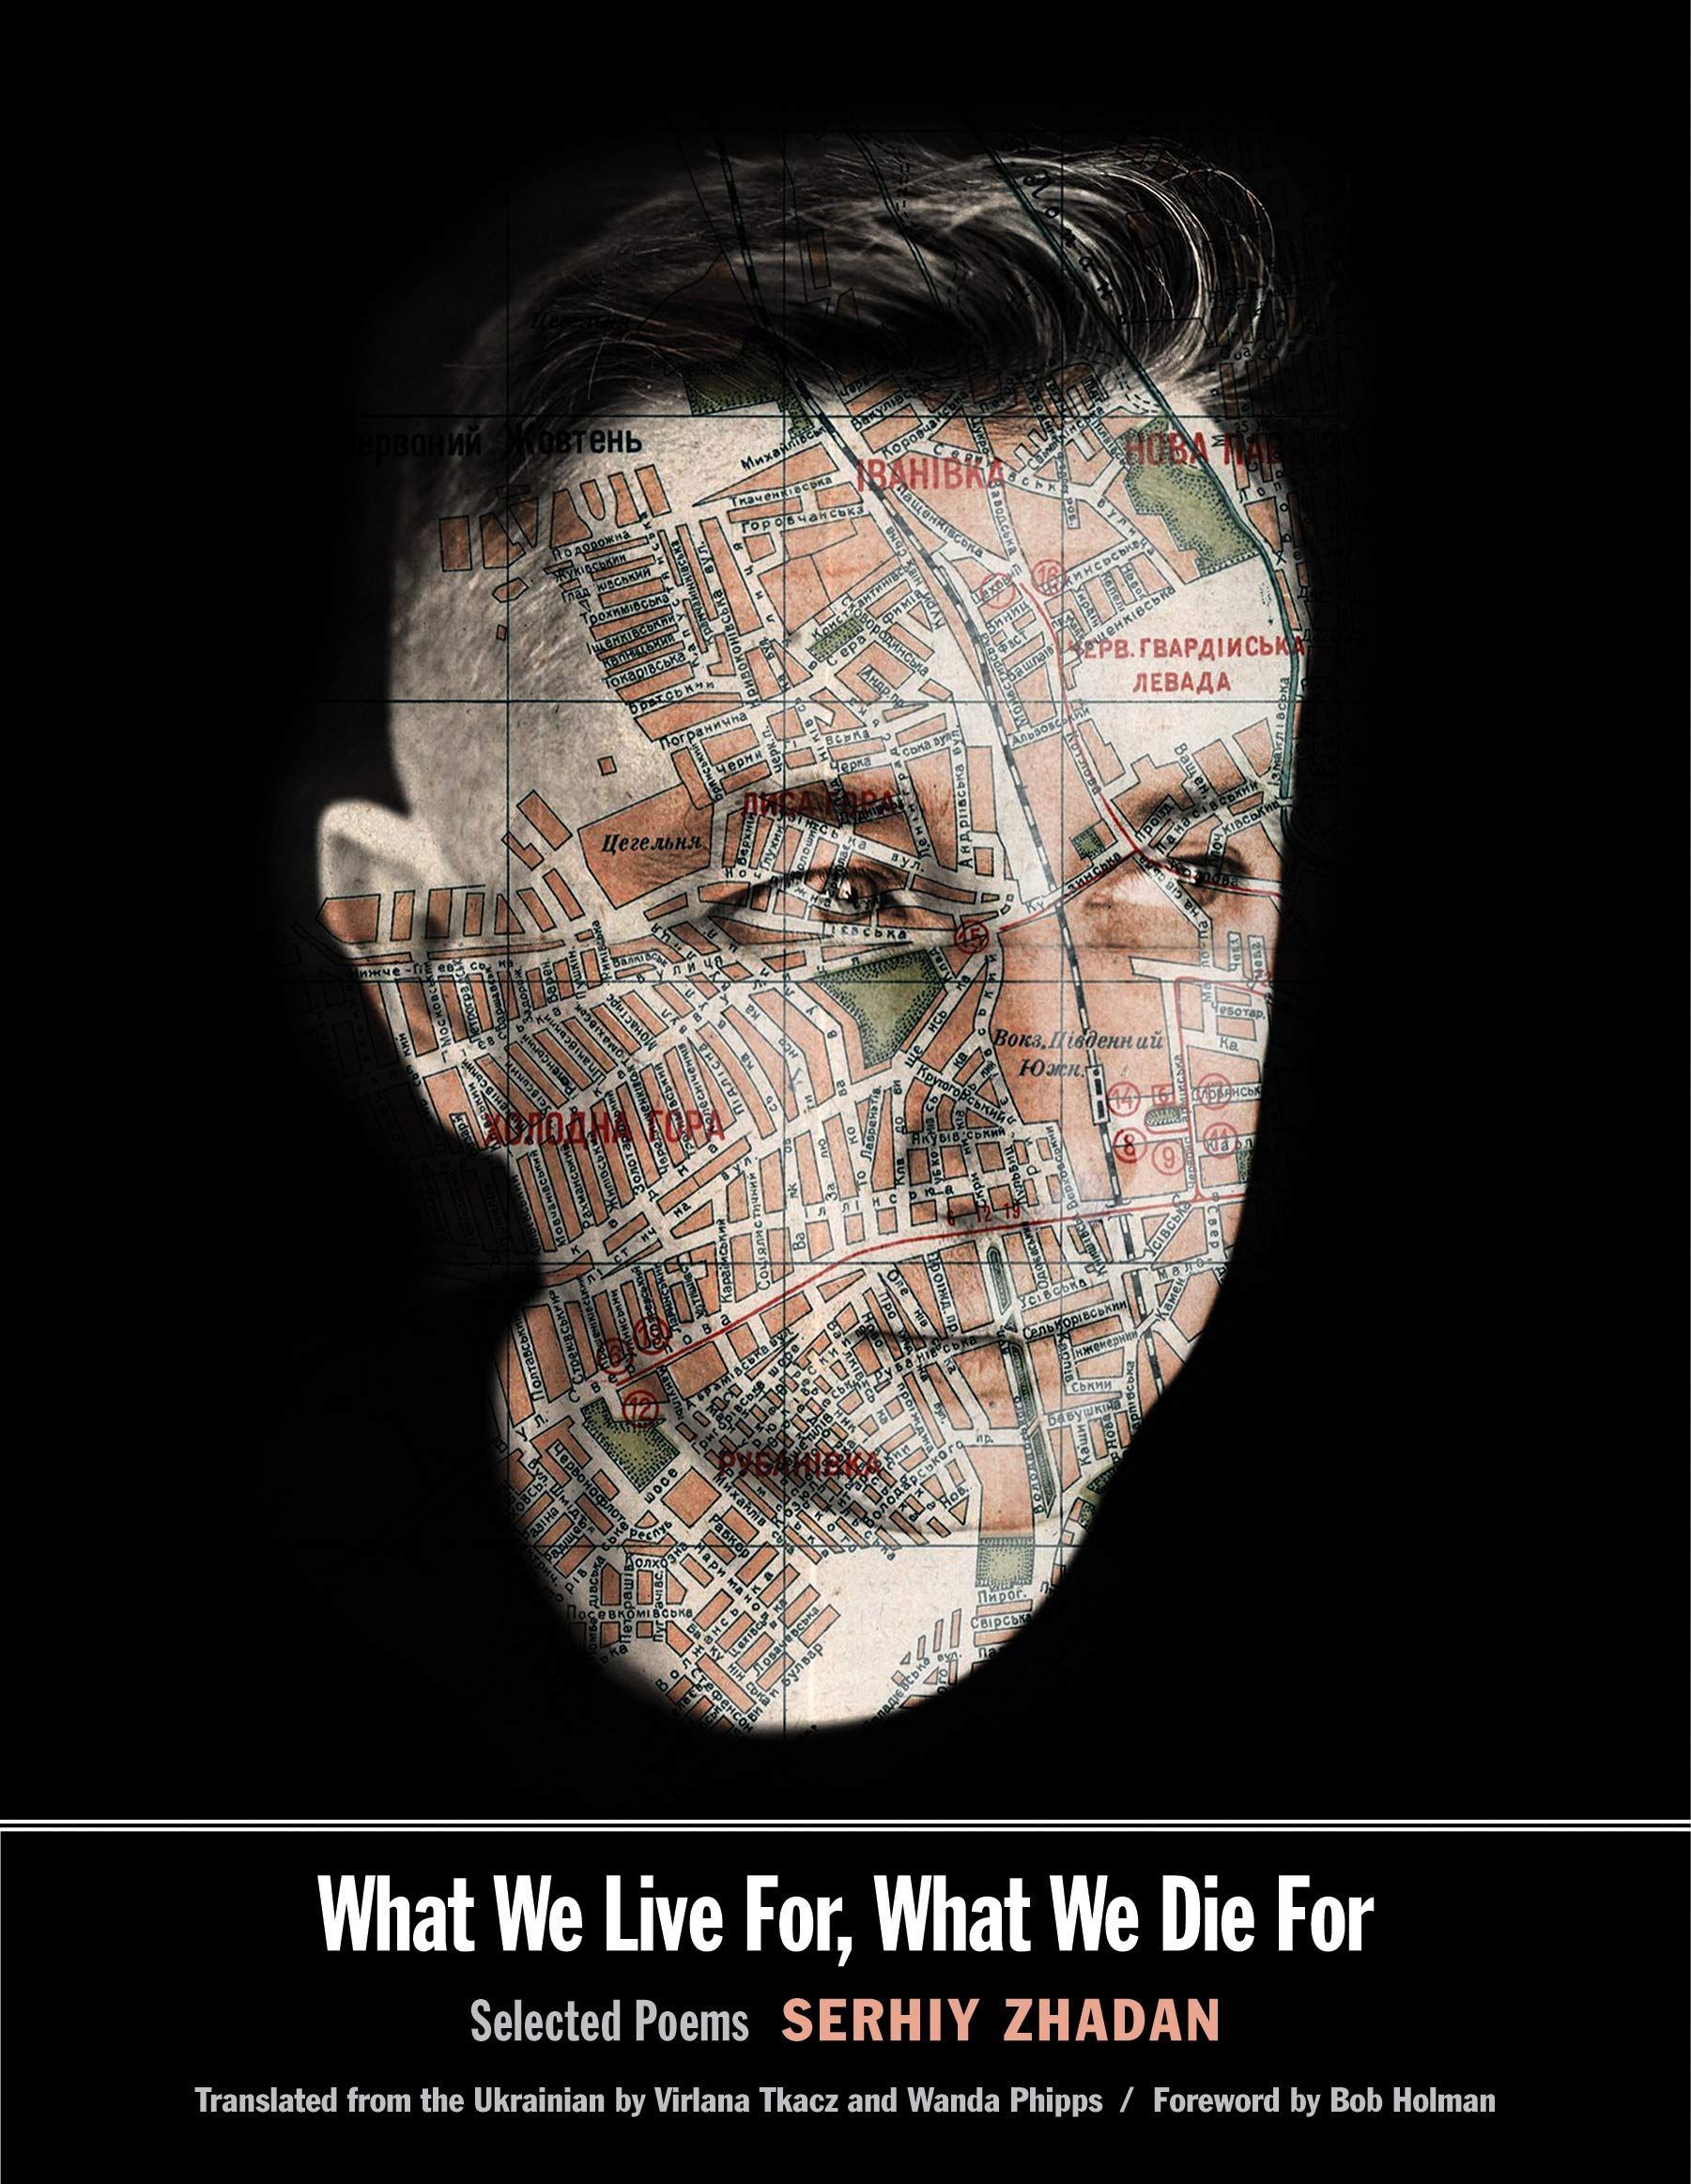 Poems for an Uncertain World: On Serhiy Zhadan’s “What We Live For, What We Die For”